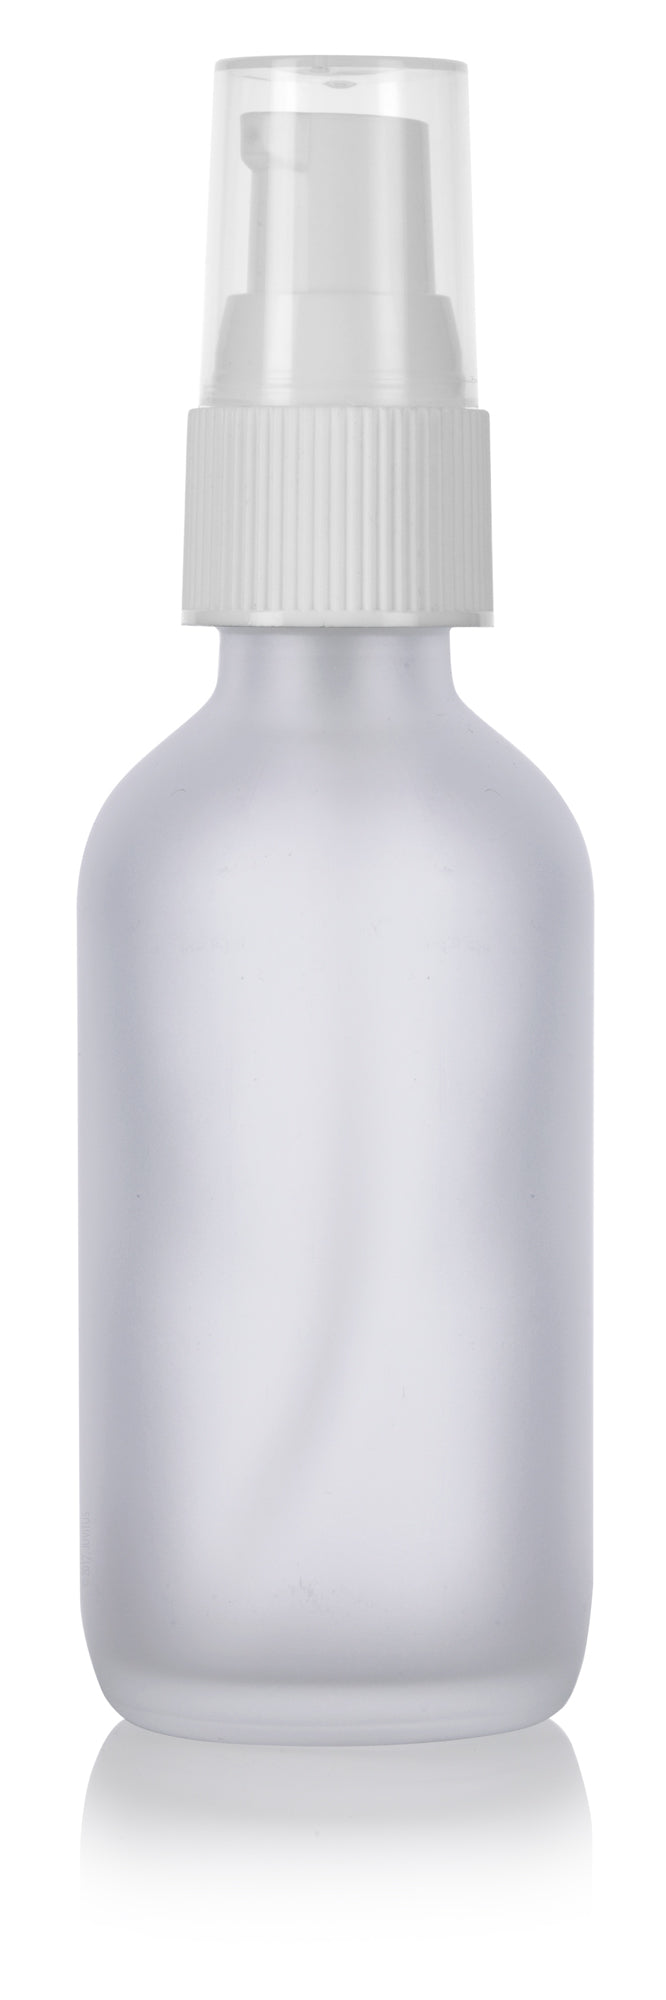 Download Frosted Clear Glass Boston Round Treatment Pump Bottle with White Top - 2 oz / 60 ml